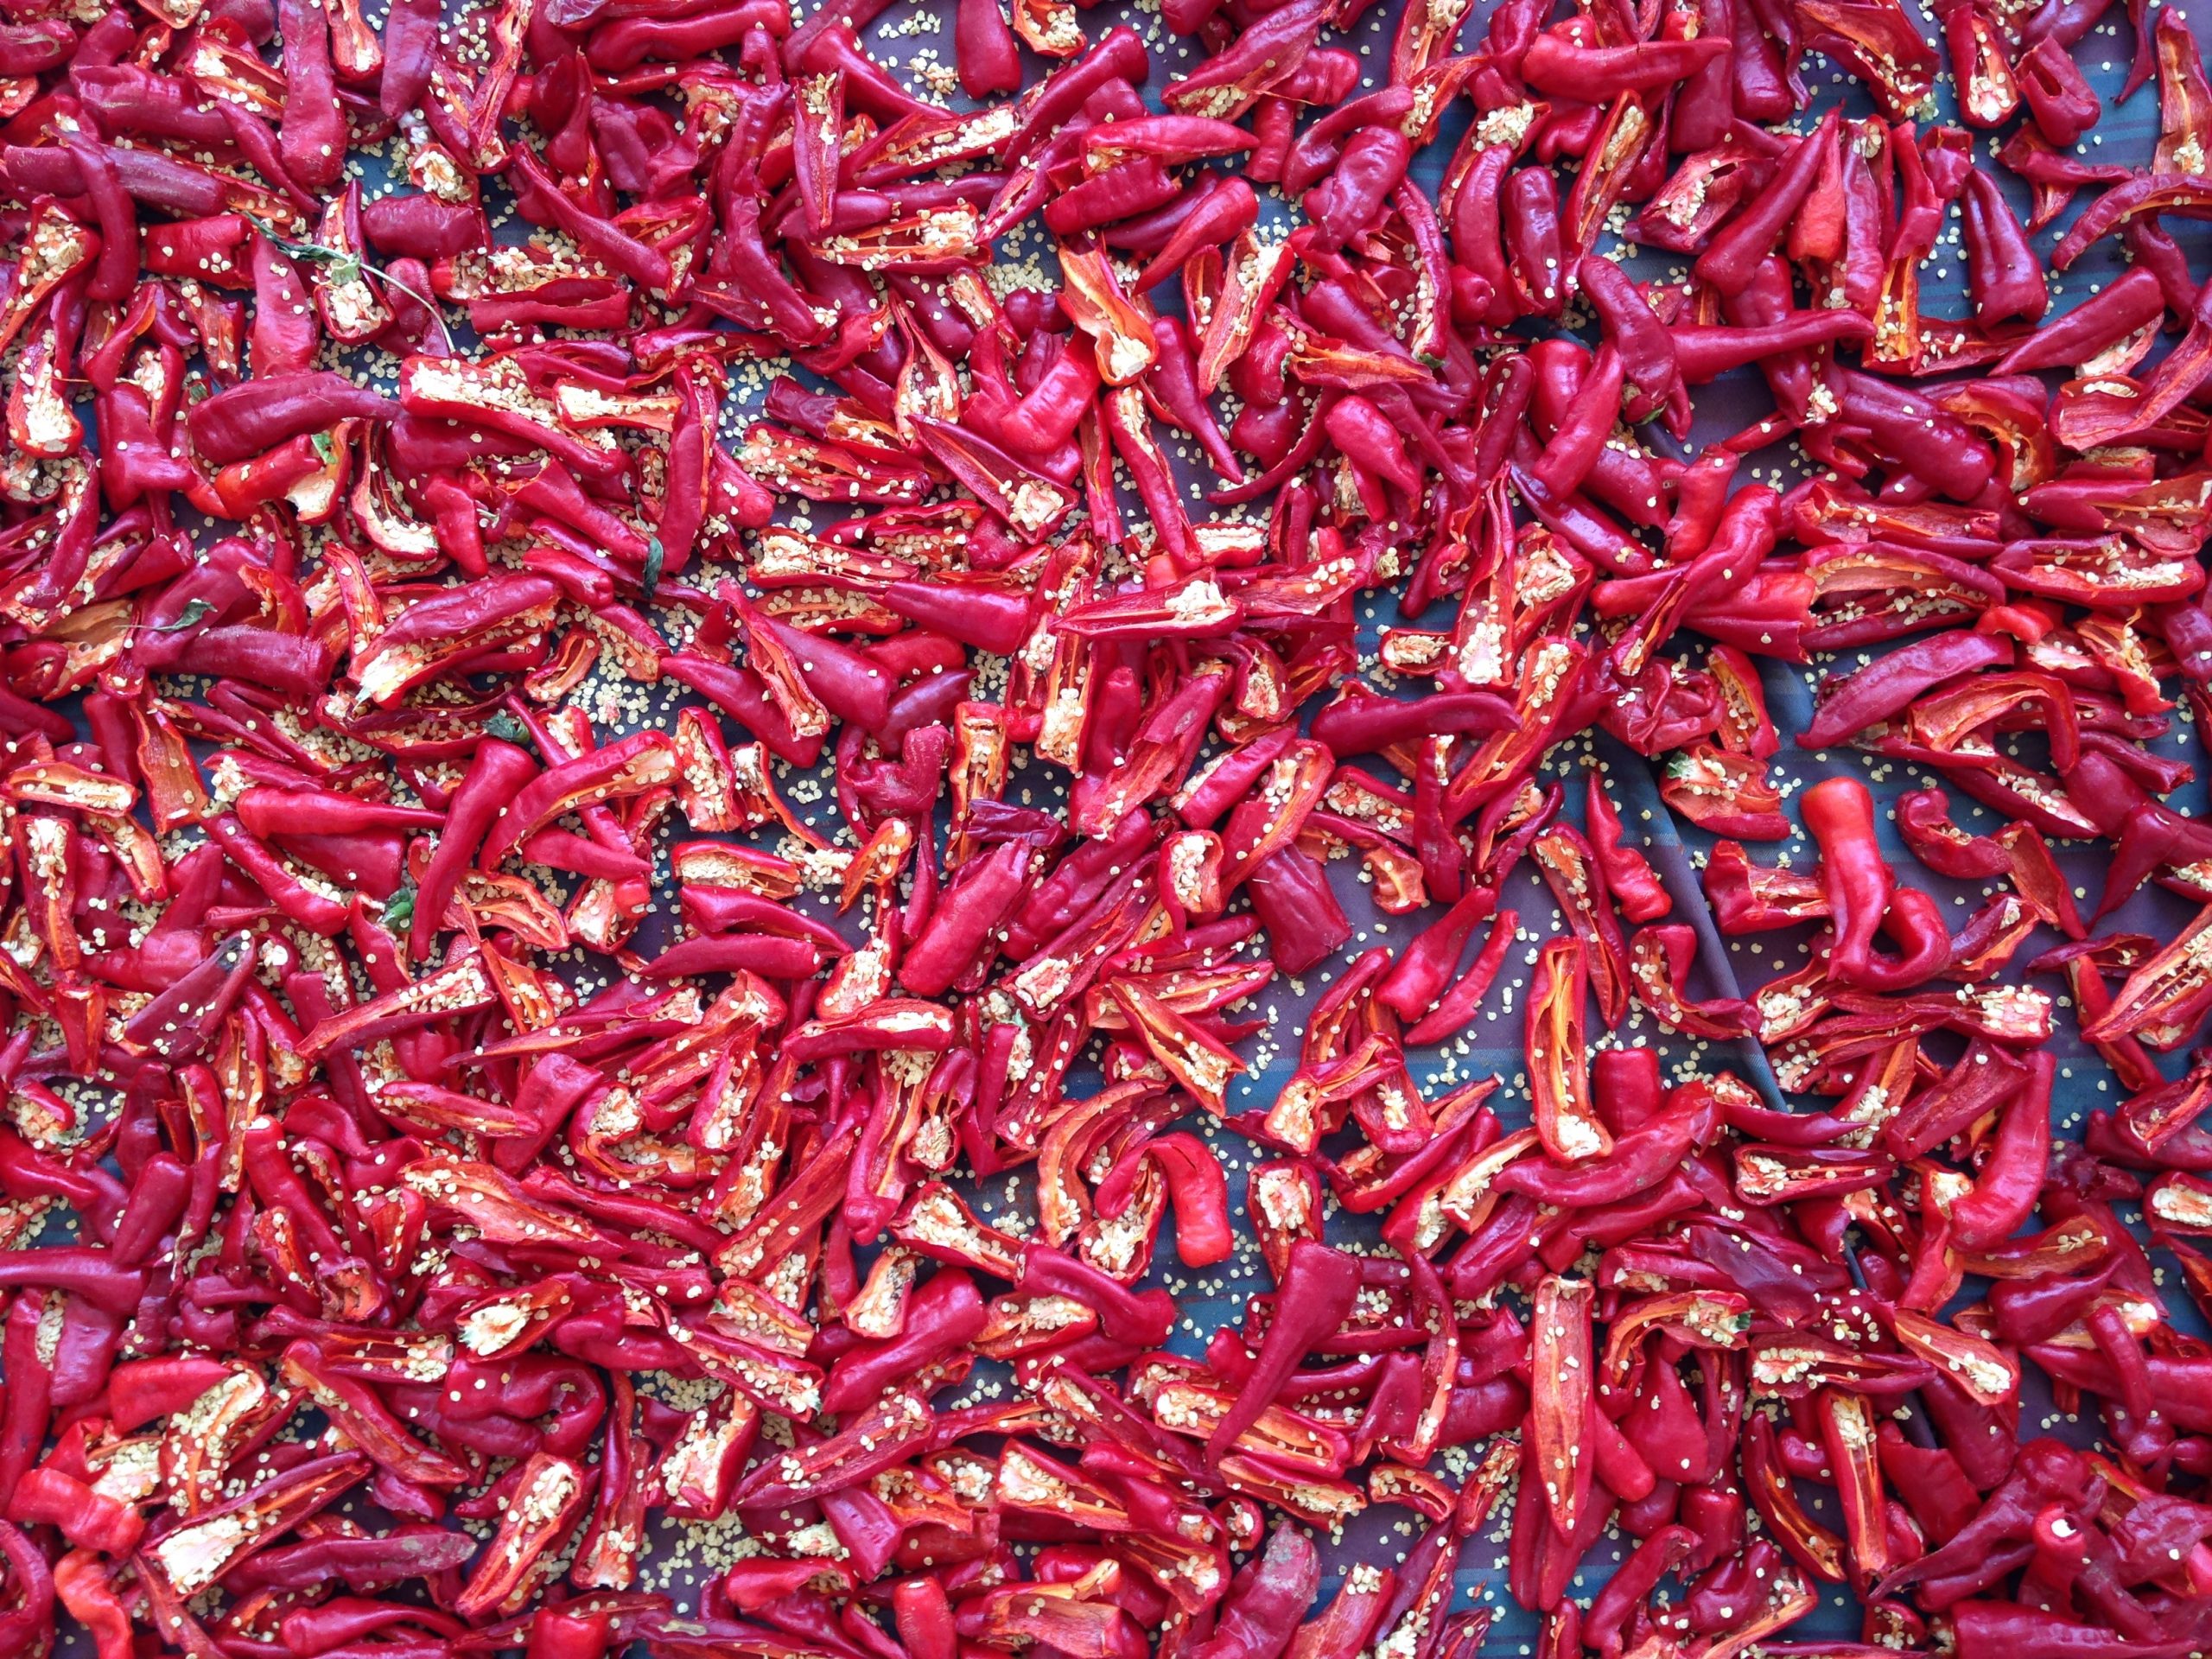 Dried Chili Peppersâ€ by Yamen is licensed under CC BY-SA 4.0